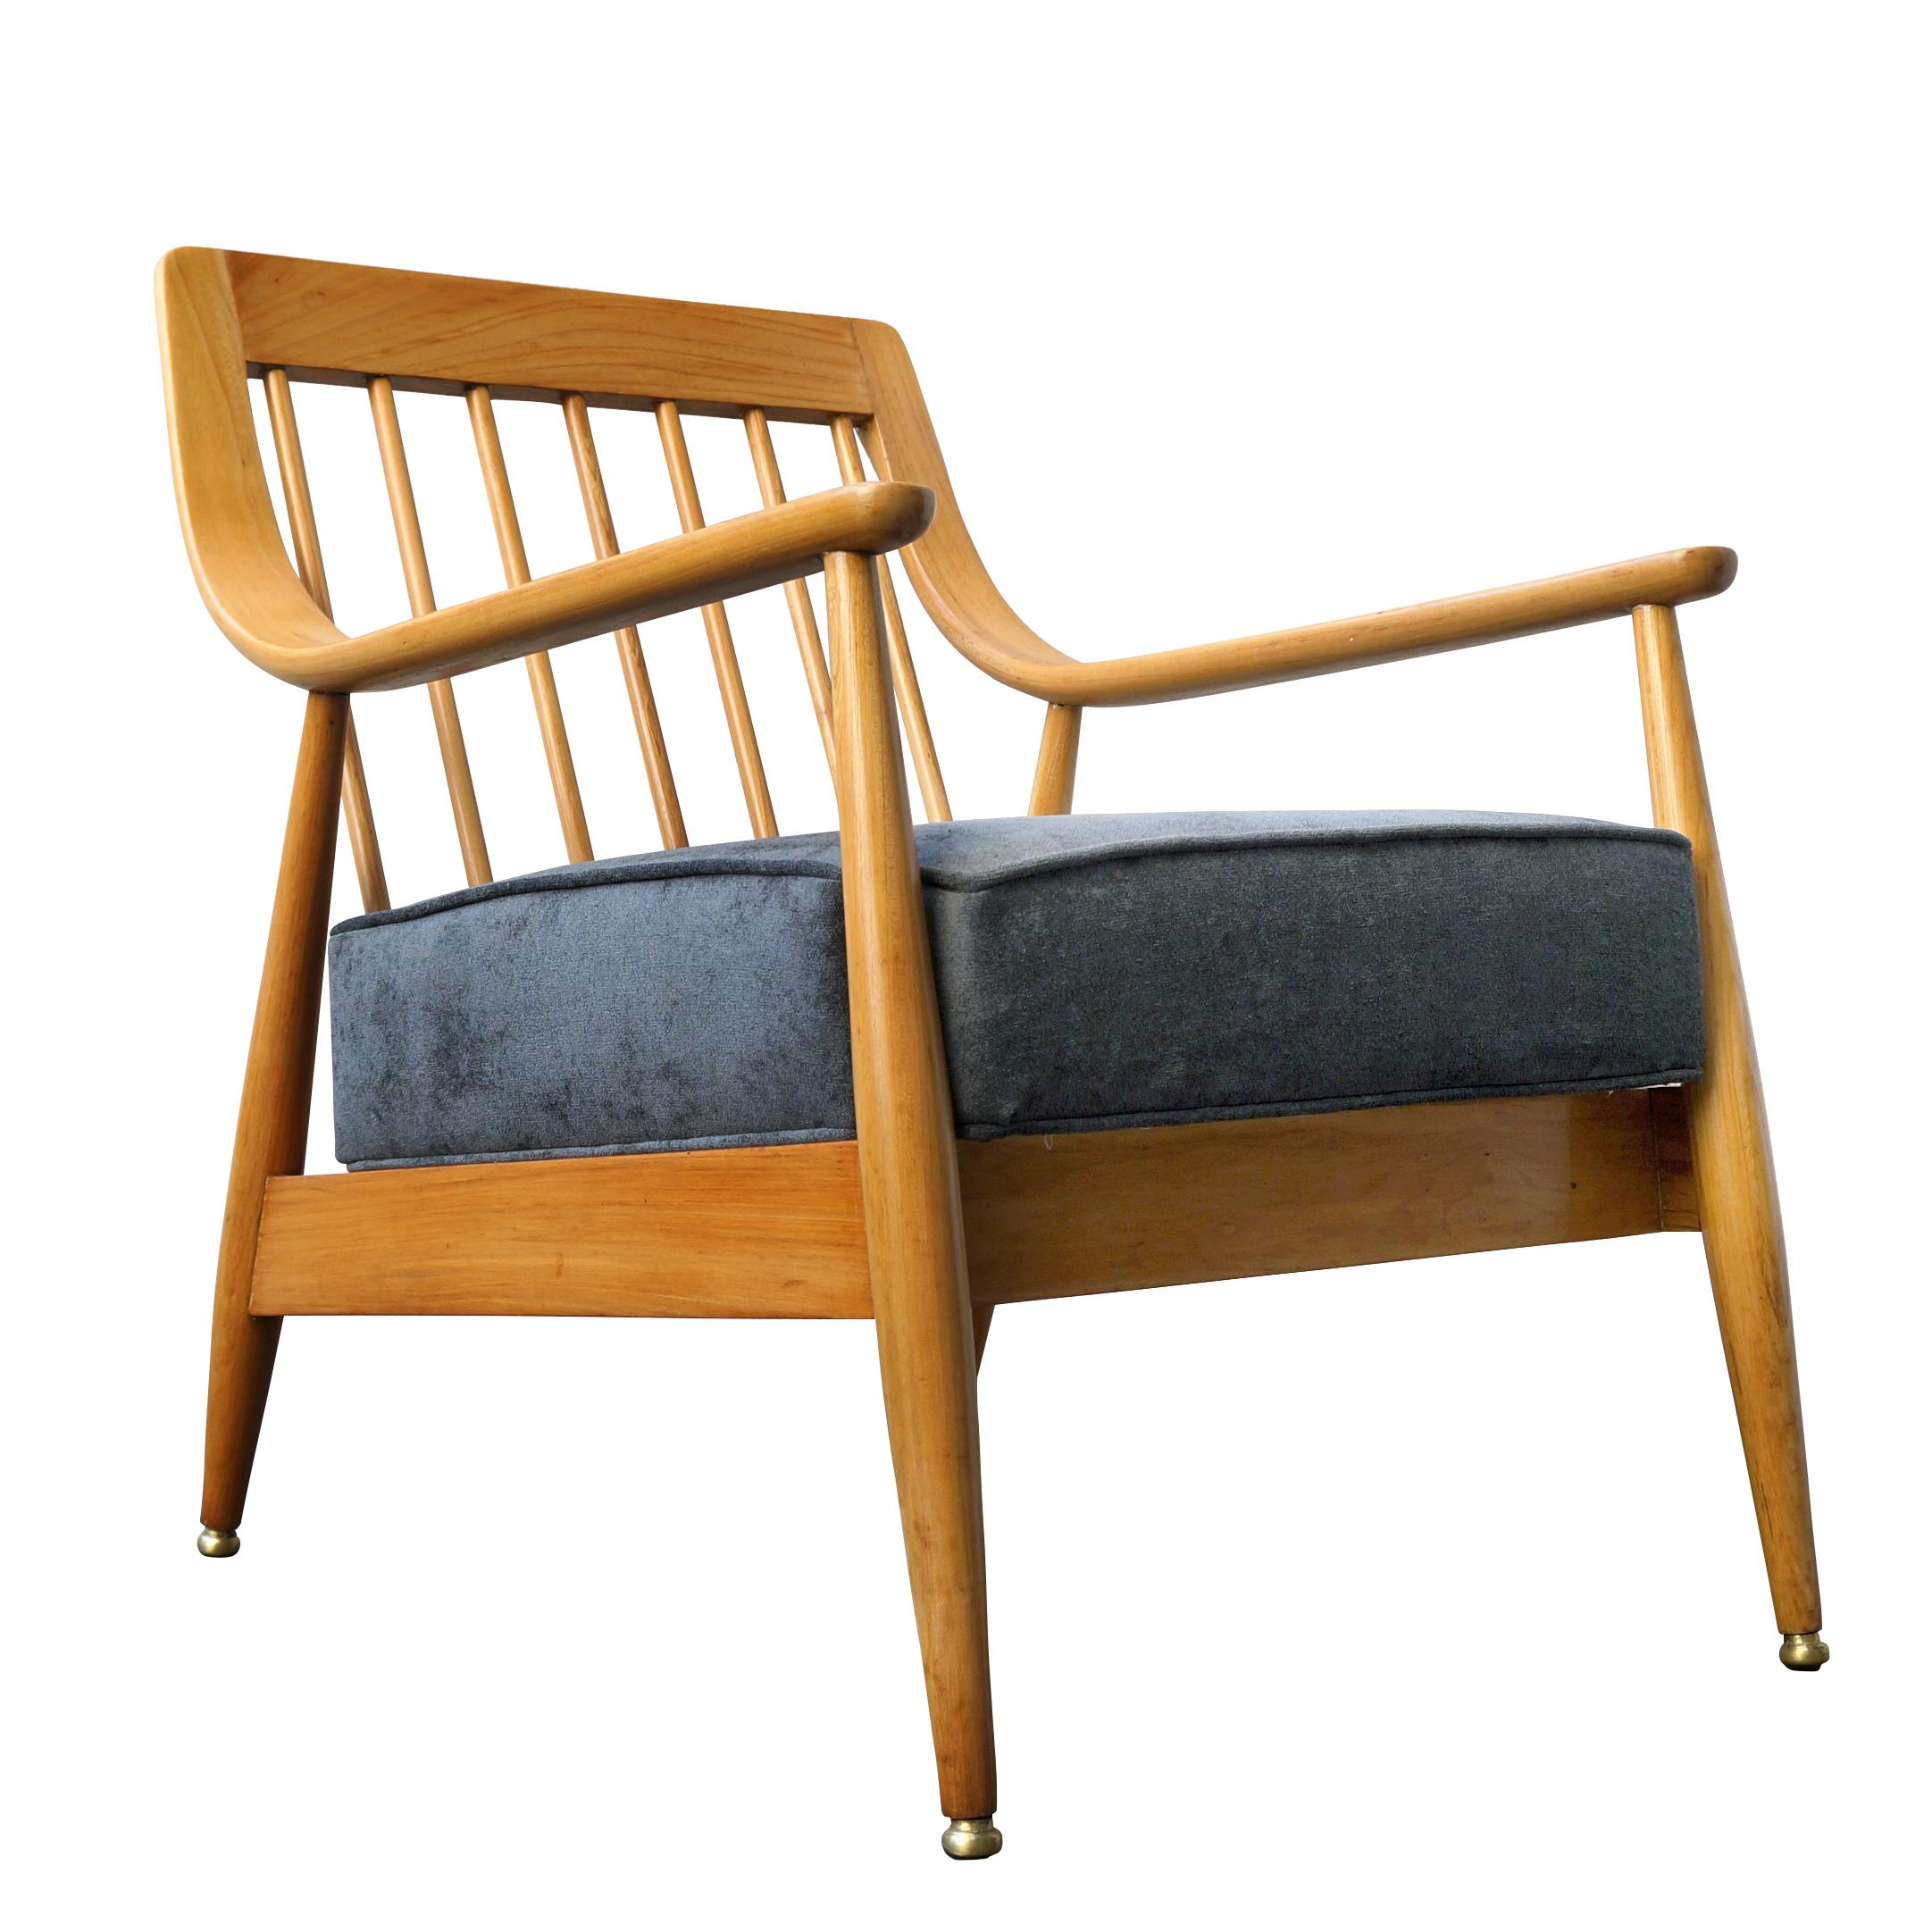 Mexican Midcentury Lounge Chair, “Malinche